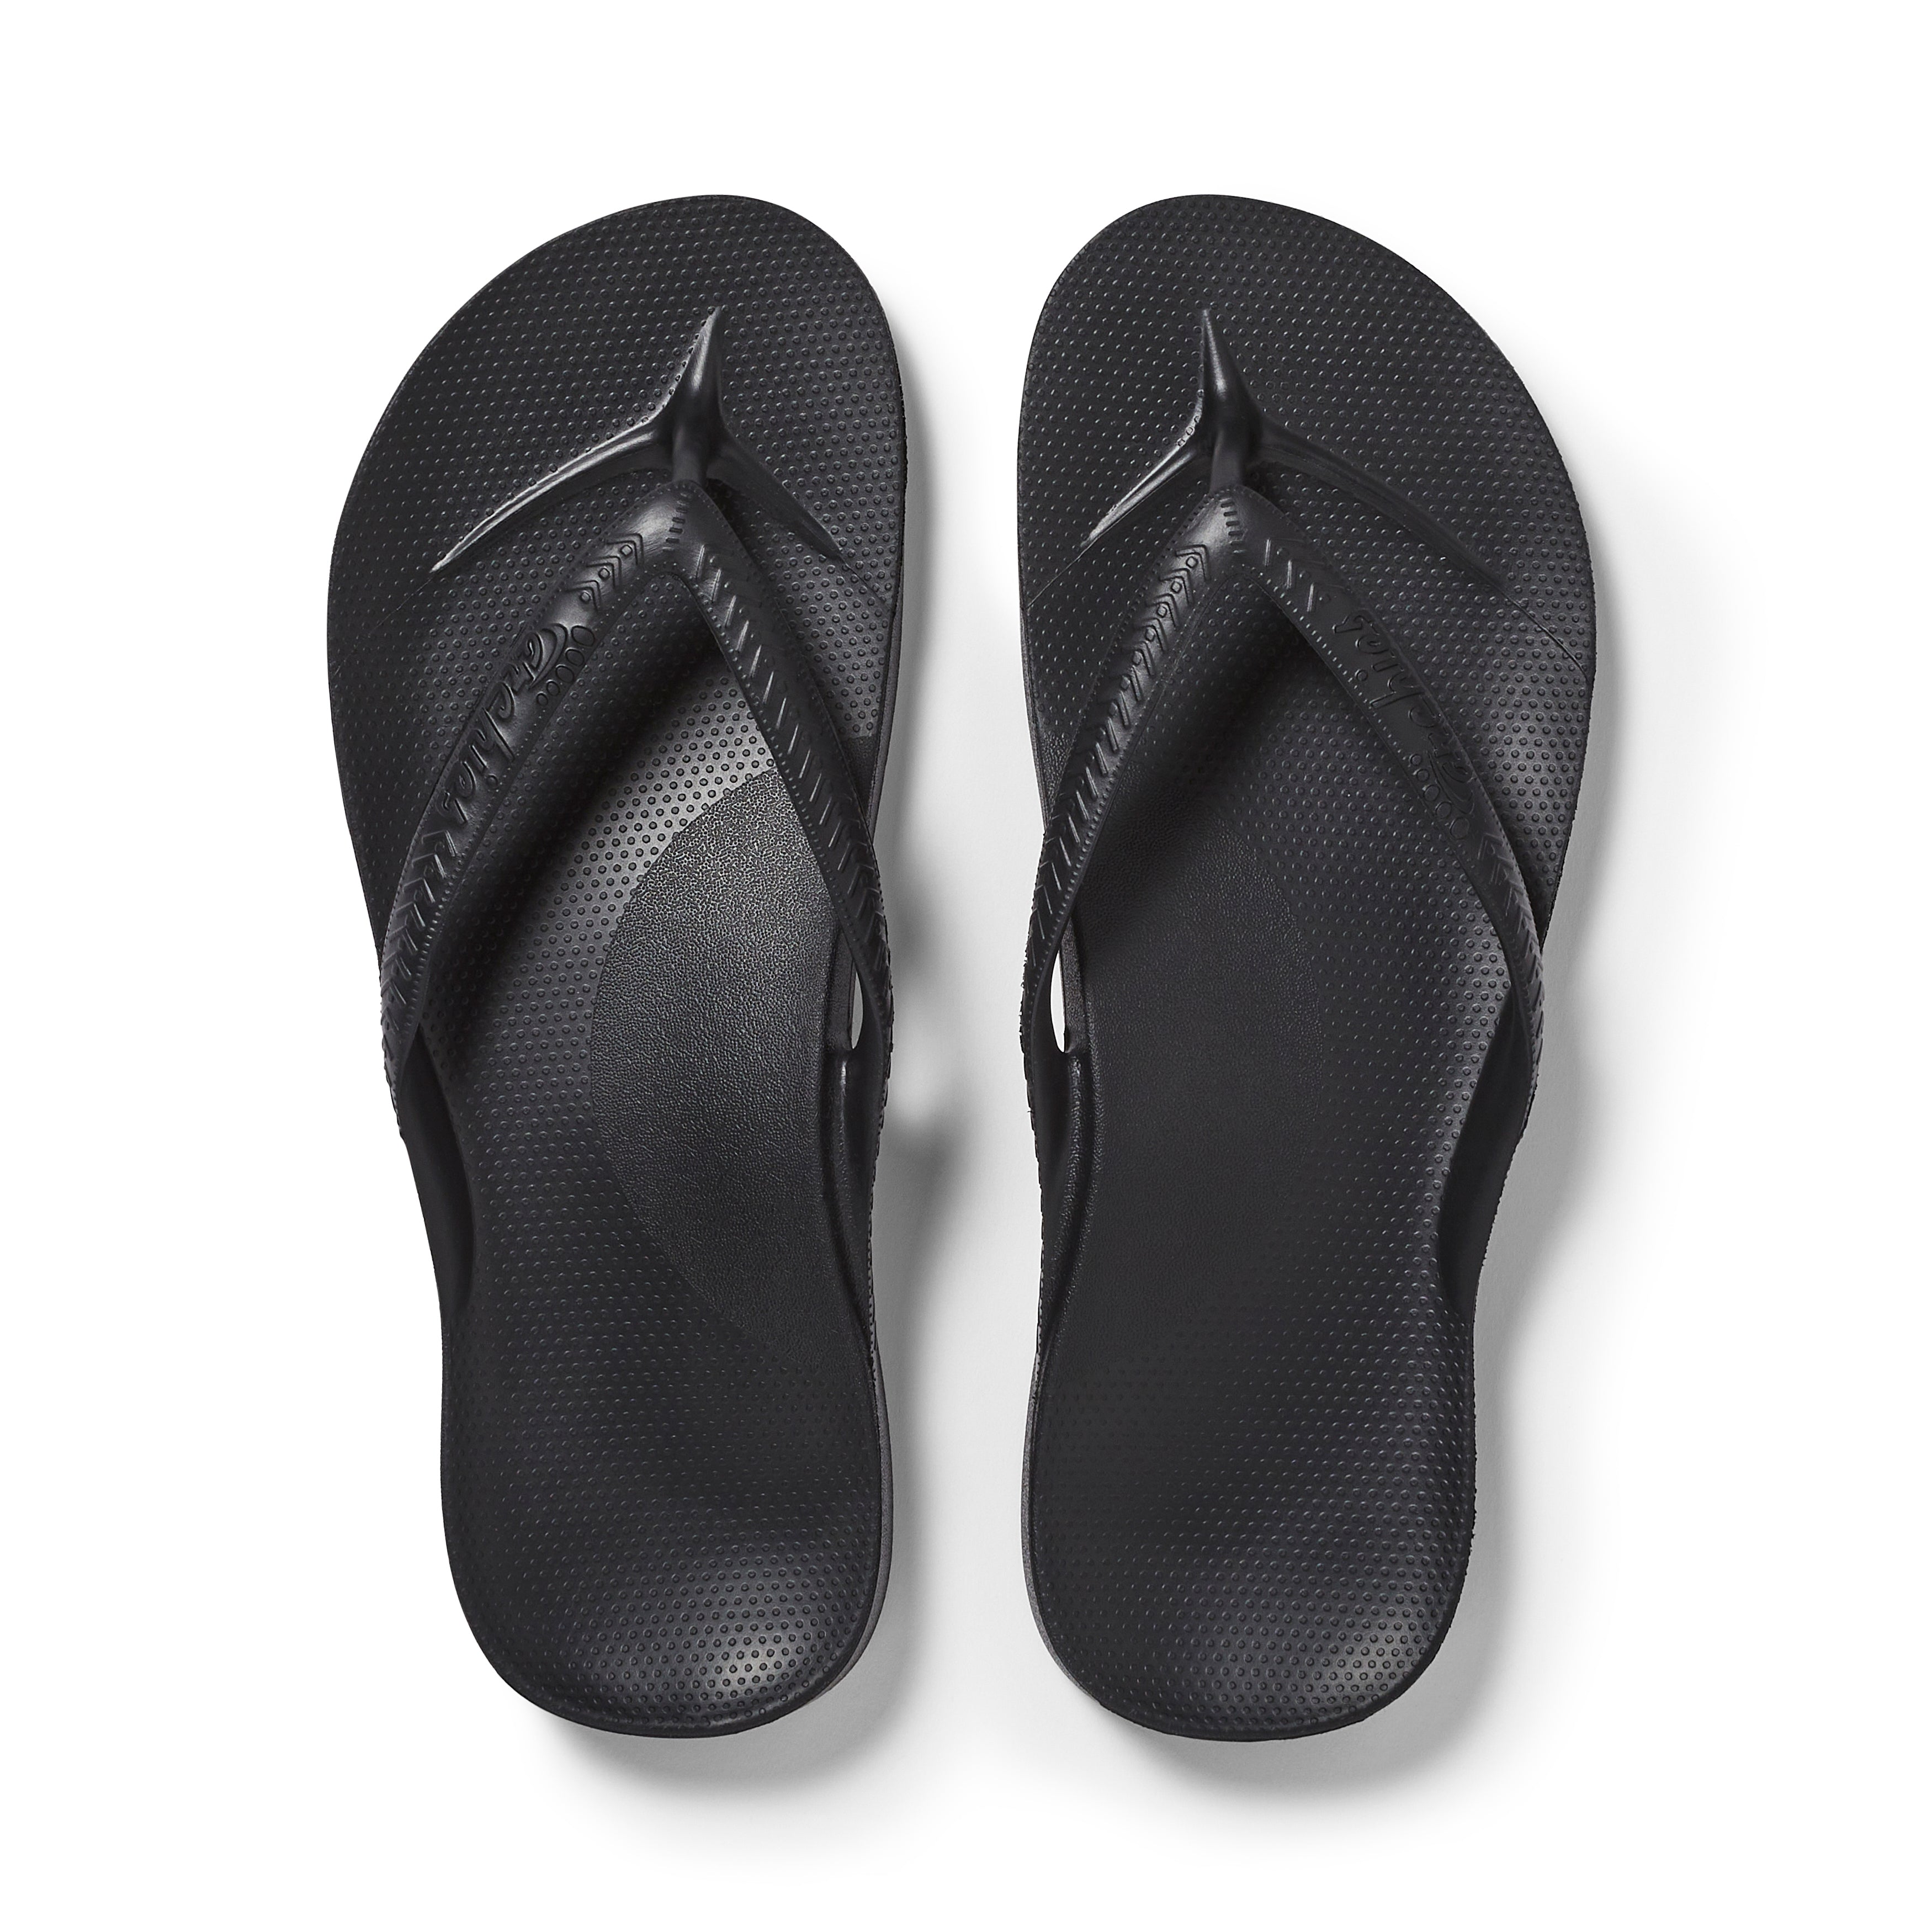 Archies Footwear Arch Support Thongs (Black)